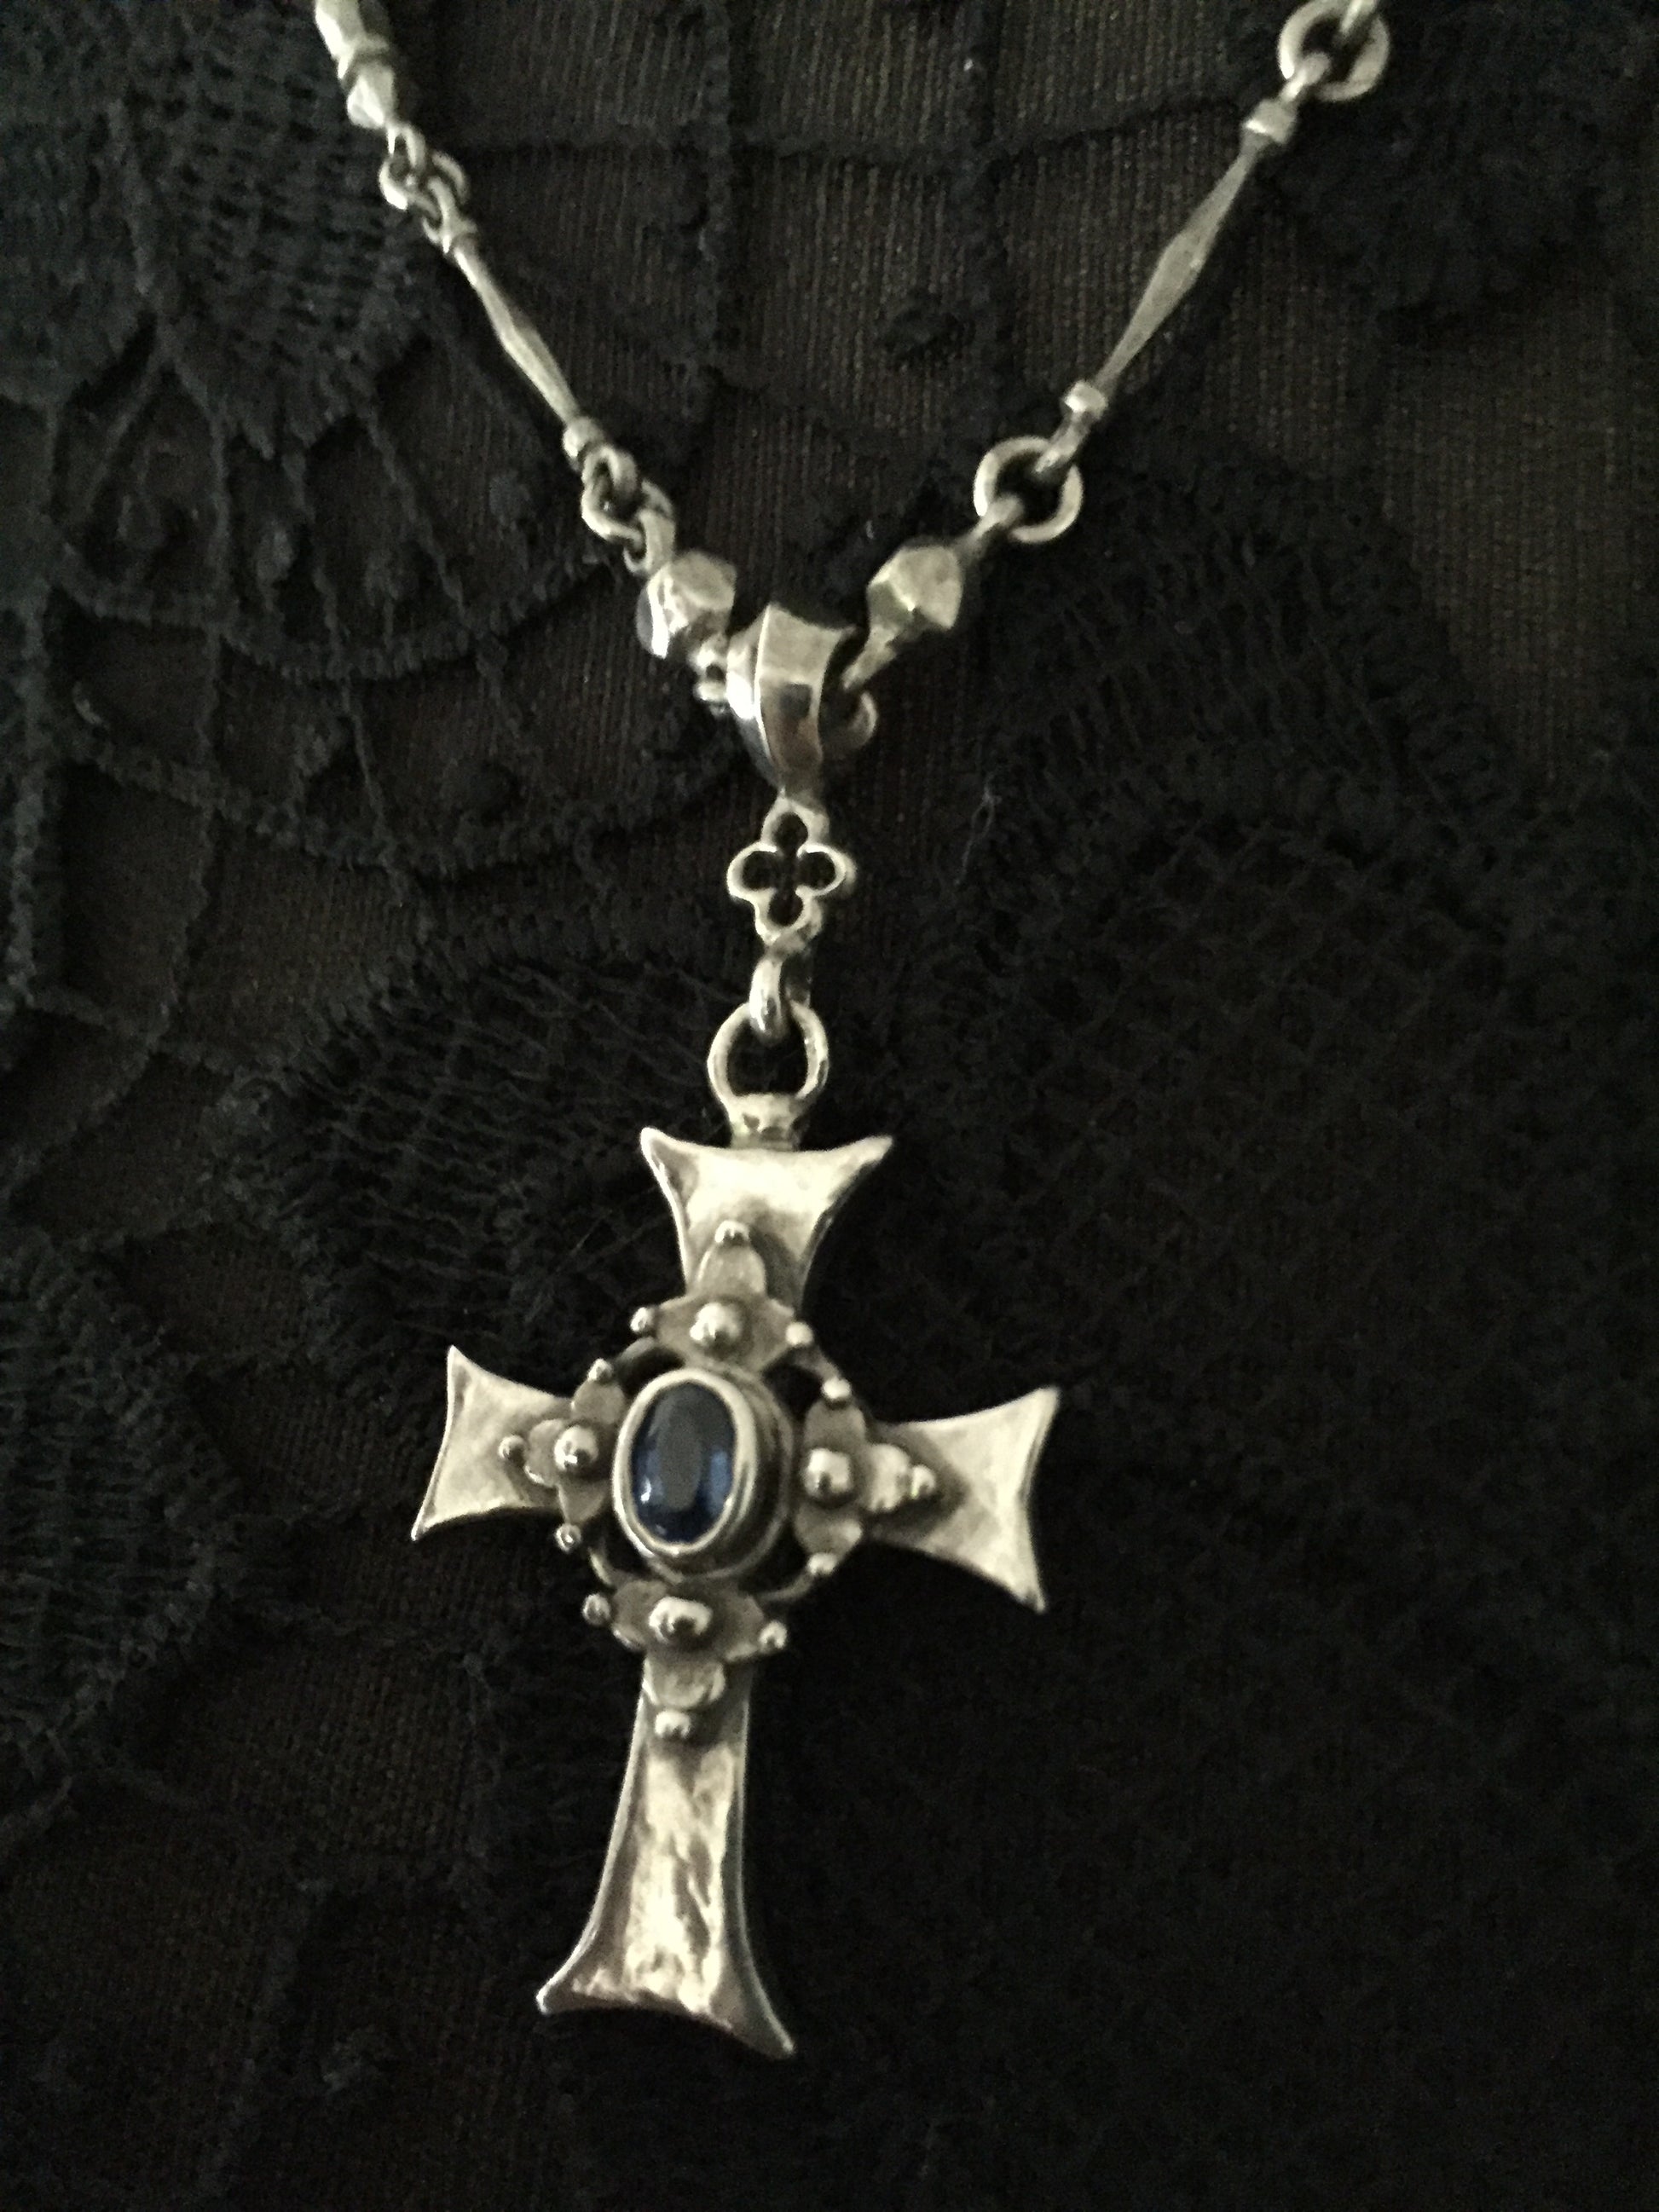 Necklace - Gothic Iolite Cross in Sterling Silver by Roman Paul